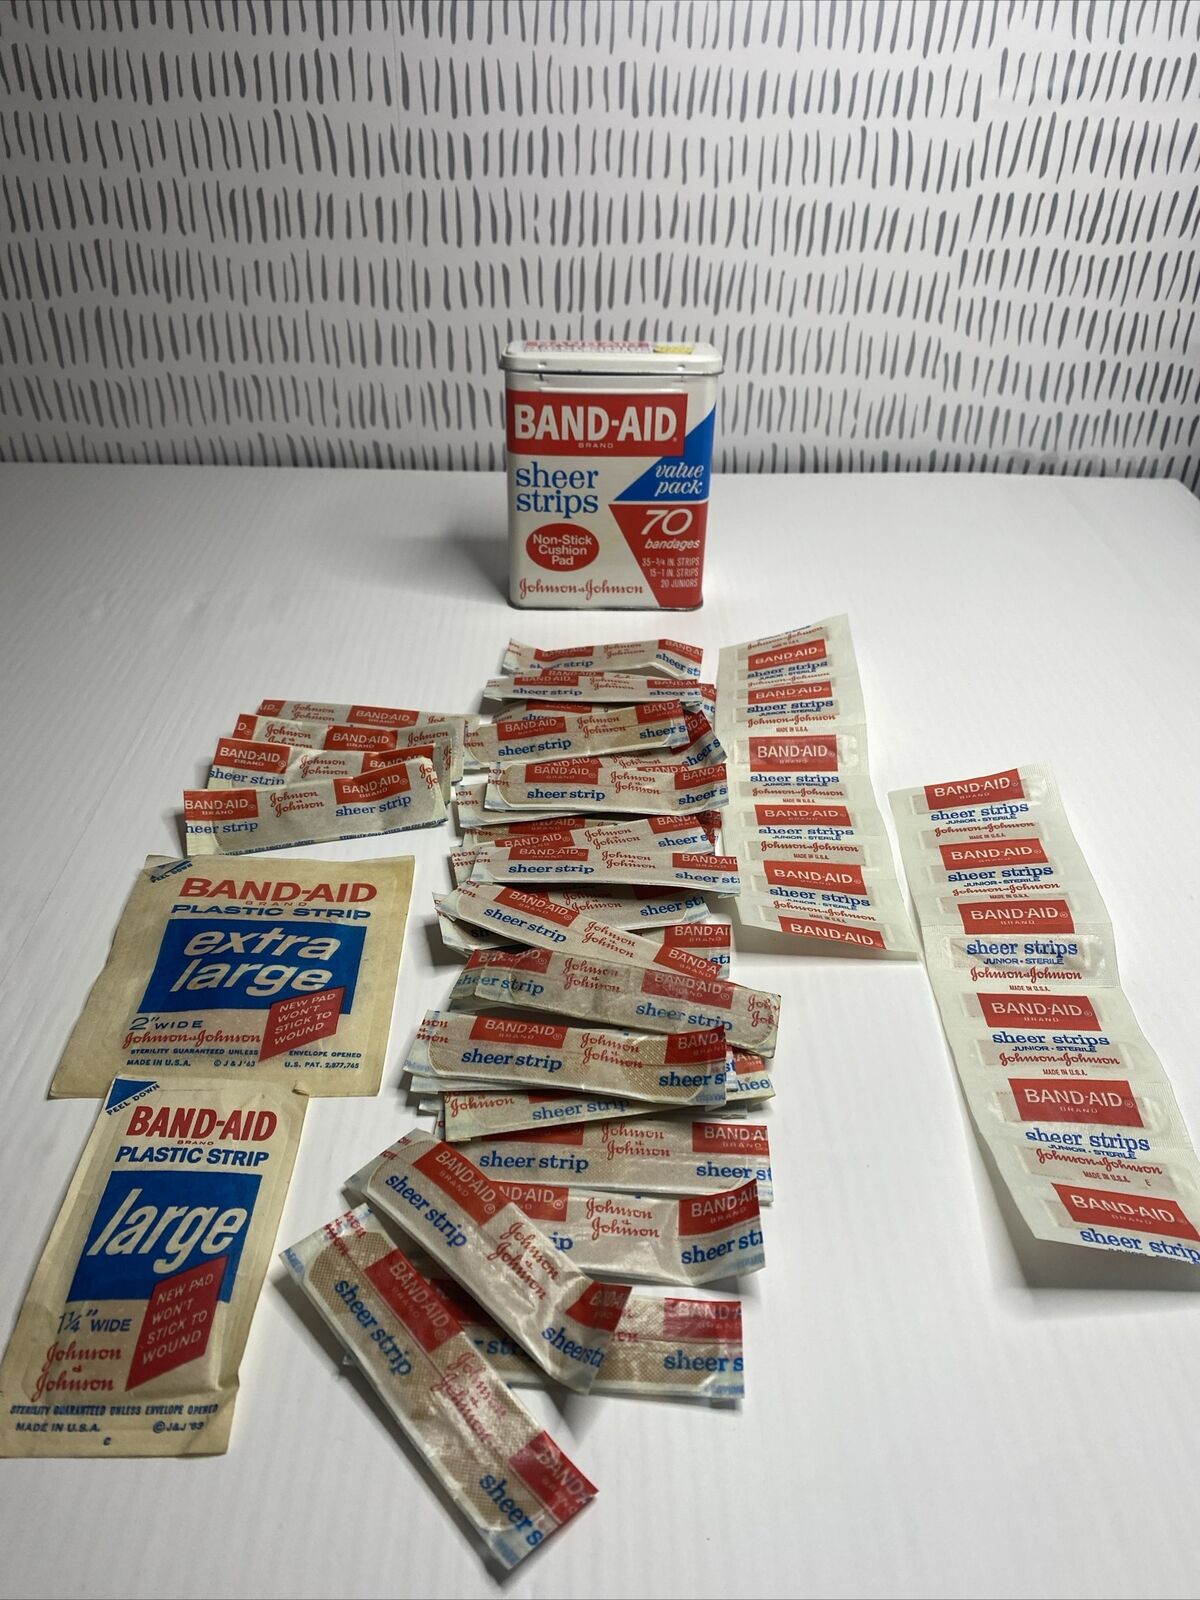 Vintage Band-Aid Sheer Strips Value Pack Tin Box Package With Bandages